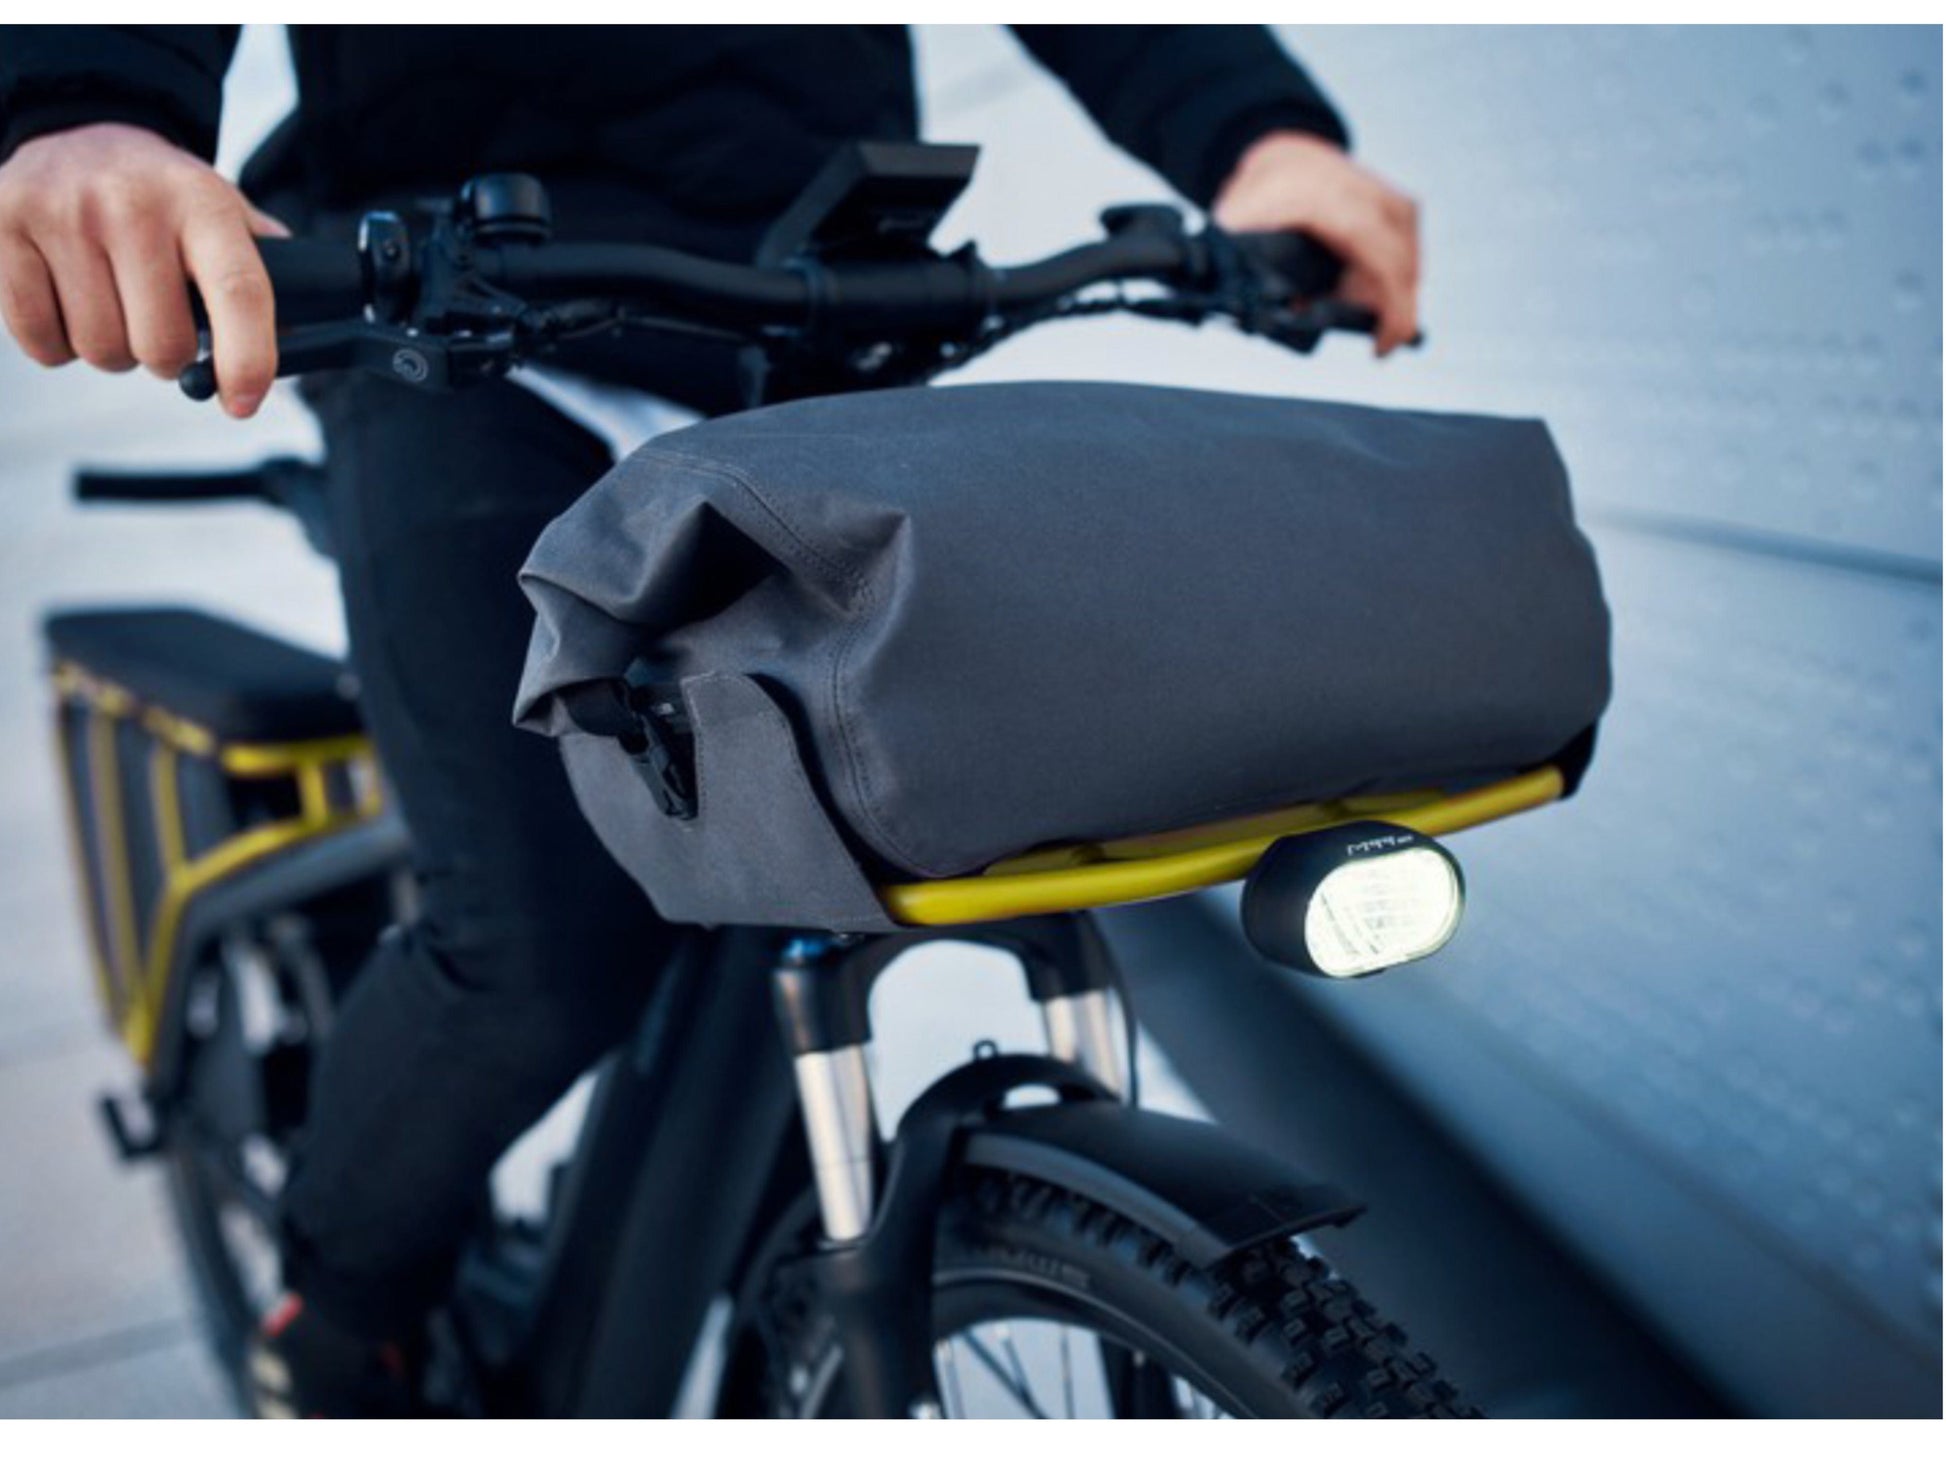 Riese and Muller Multicharger GT Touring HS emtb hardtail close up front carrier bag option headlight